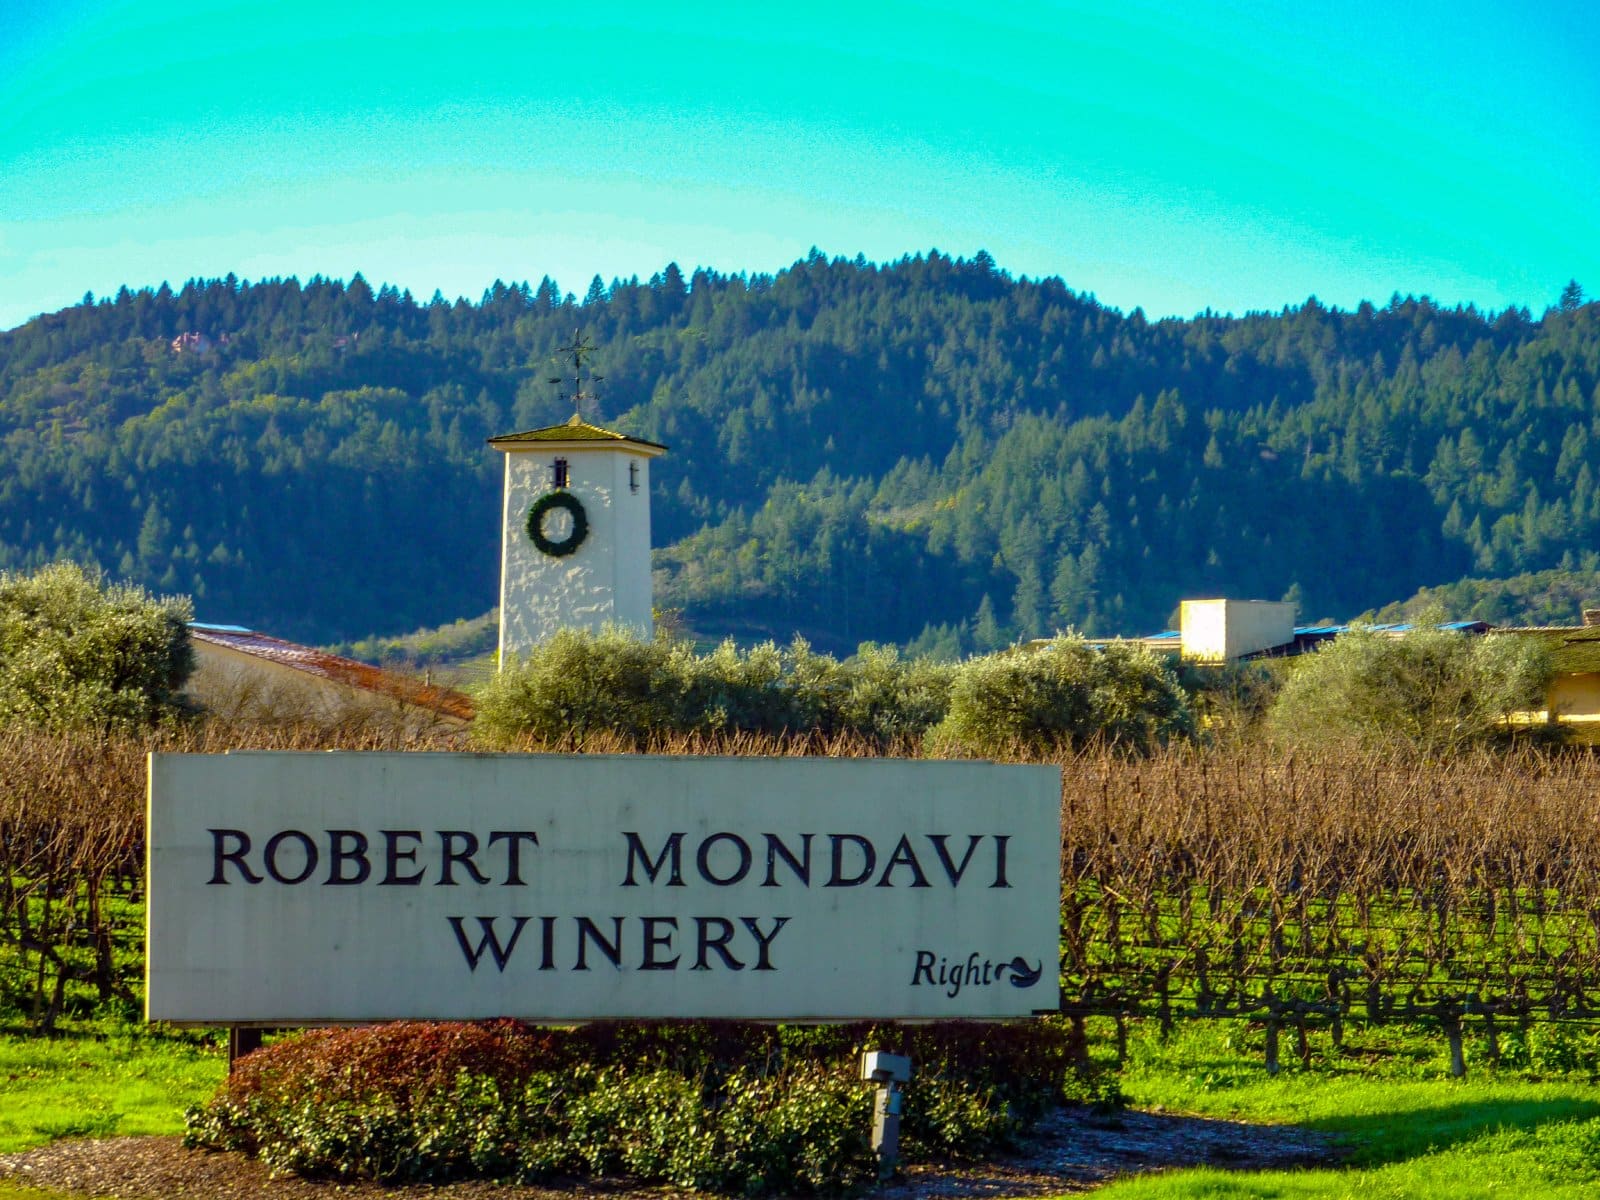 <p class="wp-caption-text">Image Credit: Shutterstock / Meandering Trail Media</p>  <p><span>The Robert Mondavi Winery is at the heart of Napa Valley’s winemaking legacy, known for its commitment to producing high-quality wines that reflect the region’s terroir. The winery offers a range of educational tours and tastings designed to enhance visitors’ understanding of the winemaking process and the subtleties of wine tasting. The stunning architecture of the winery, with its iconic arch, is as much a draw as the wines themselves, set against the backdrop of picturesque vineyards.</span></p>